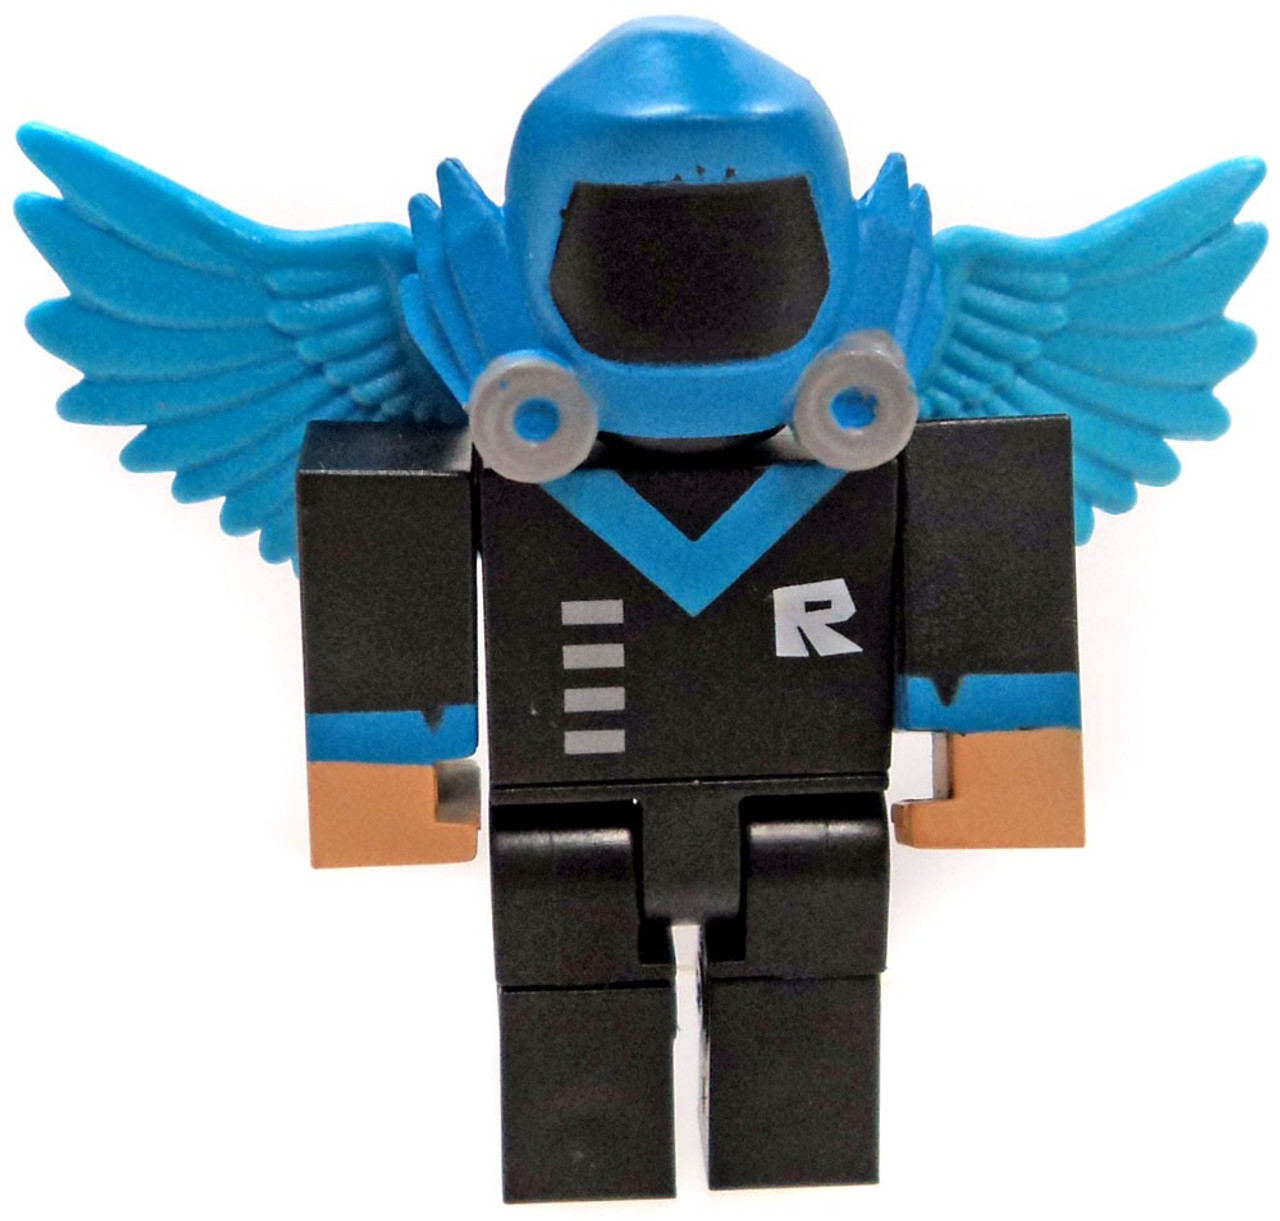 Roblox Series 2 Vurse 3 Minifigure Includes Online Code Loose Jazwares Toywiz - roblox berezaa series 2 mystery blind box 3 action figures toys